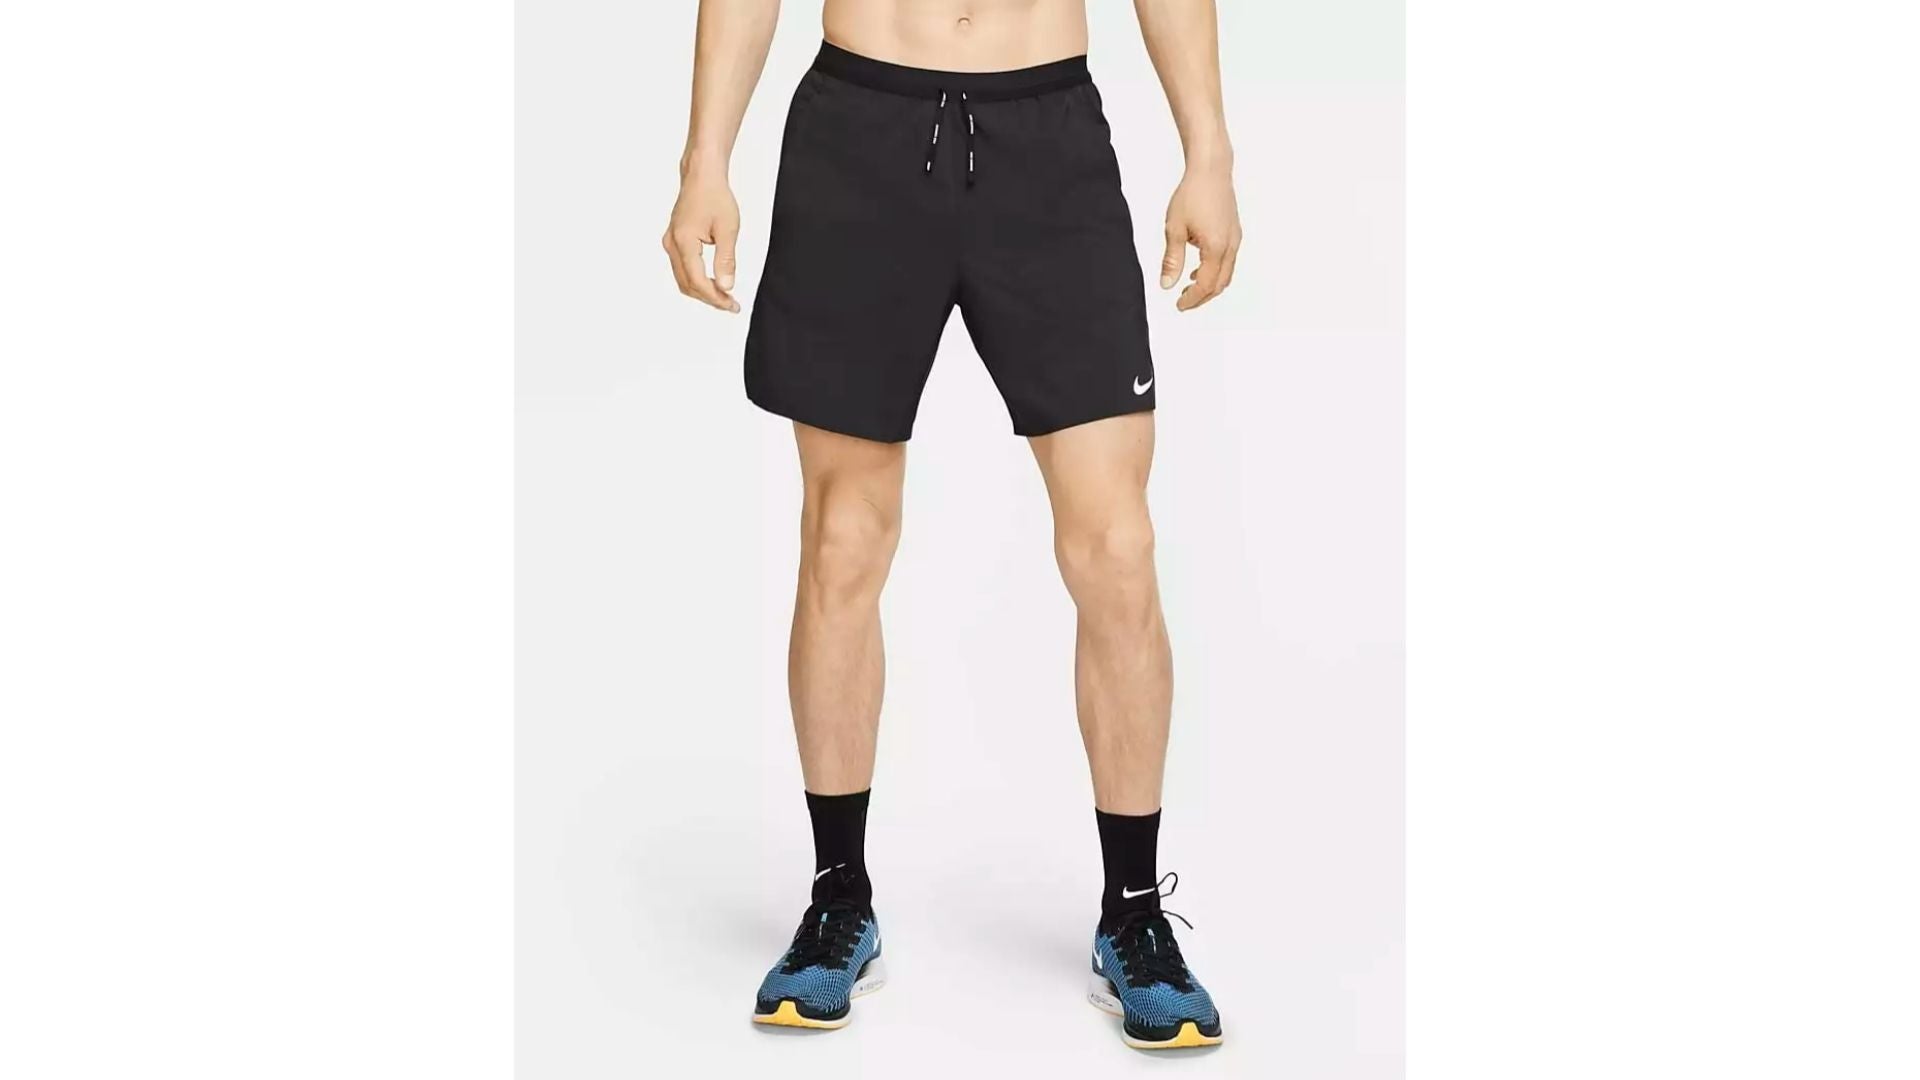 Mens Sports 1 Elite Split Running Shorts with Side Mesh Panel Quick Dry Lightweight Polyester